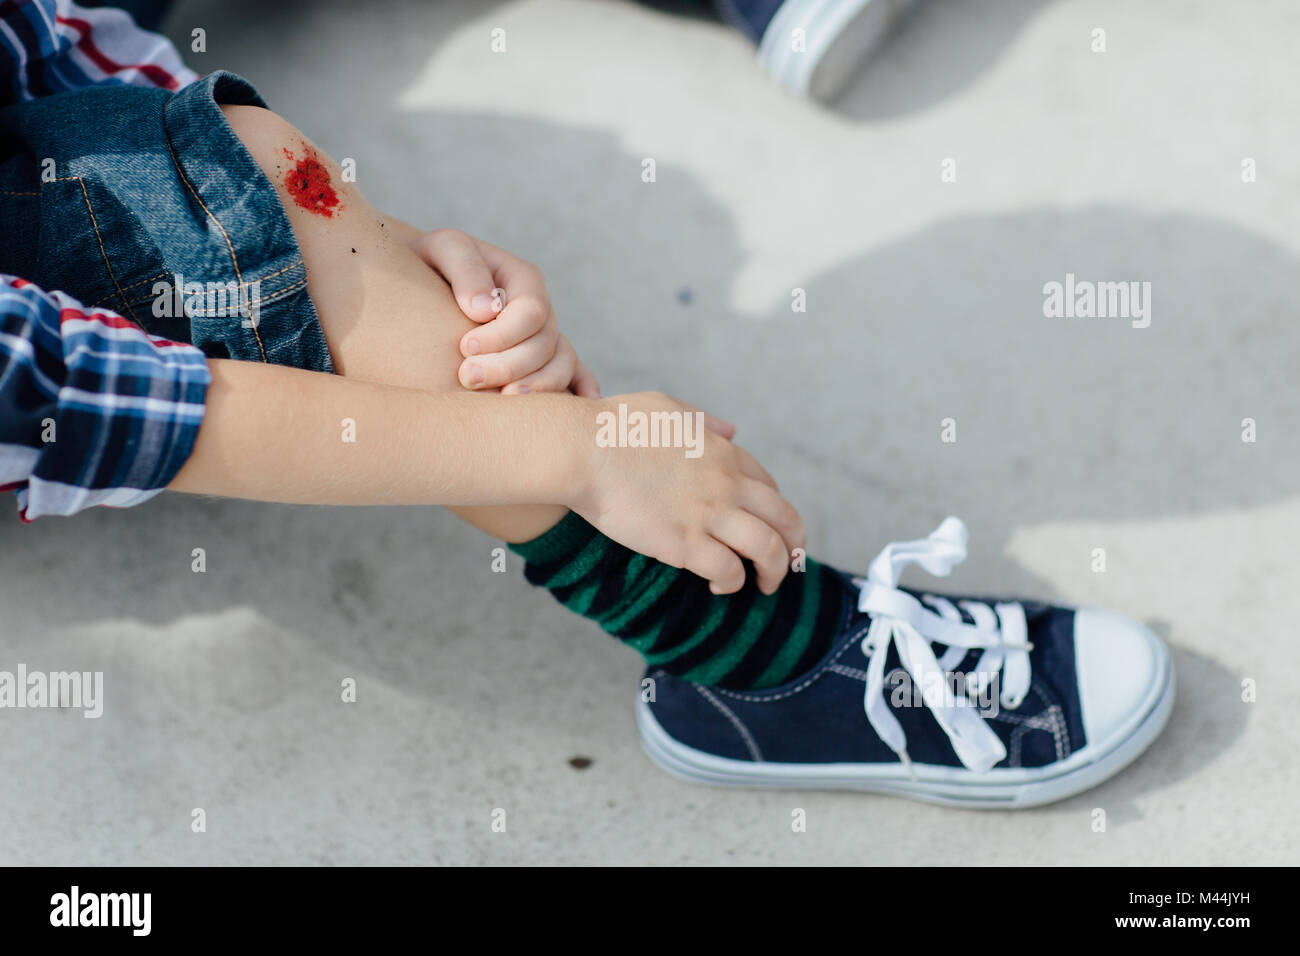 Injured boy sitting on concrete floor and  looking at his scraped knee Stock Photo